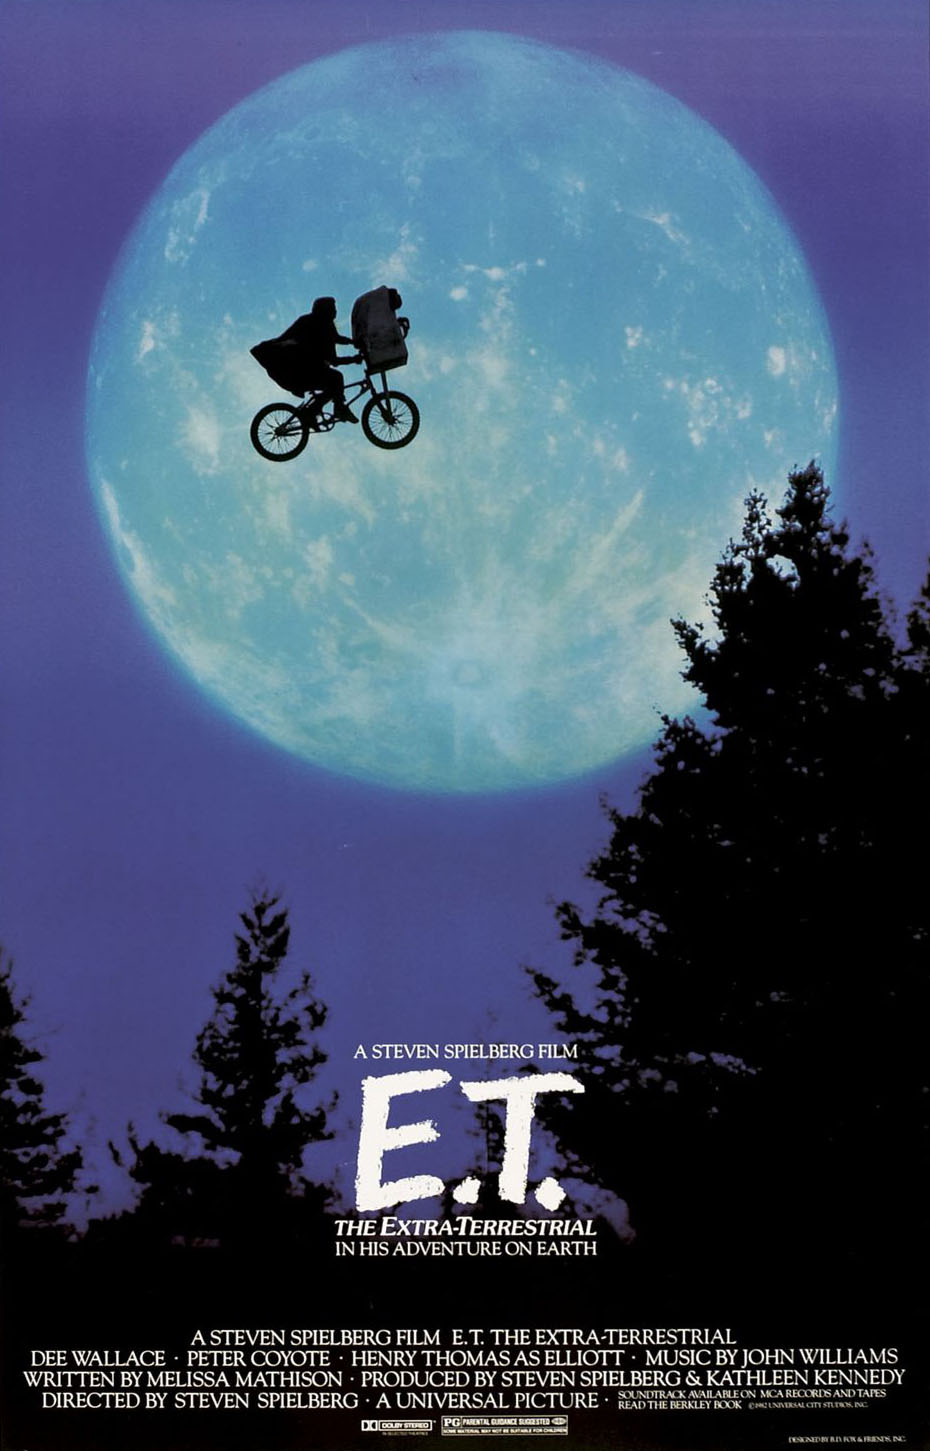 E.T. is an old sci-fi movie that you must watch